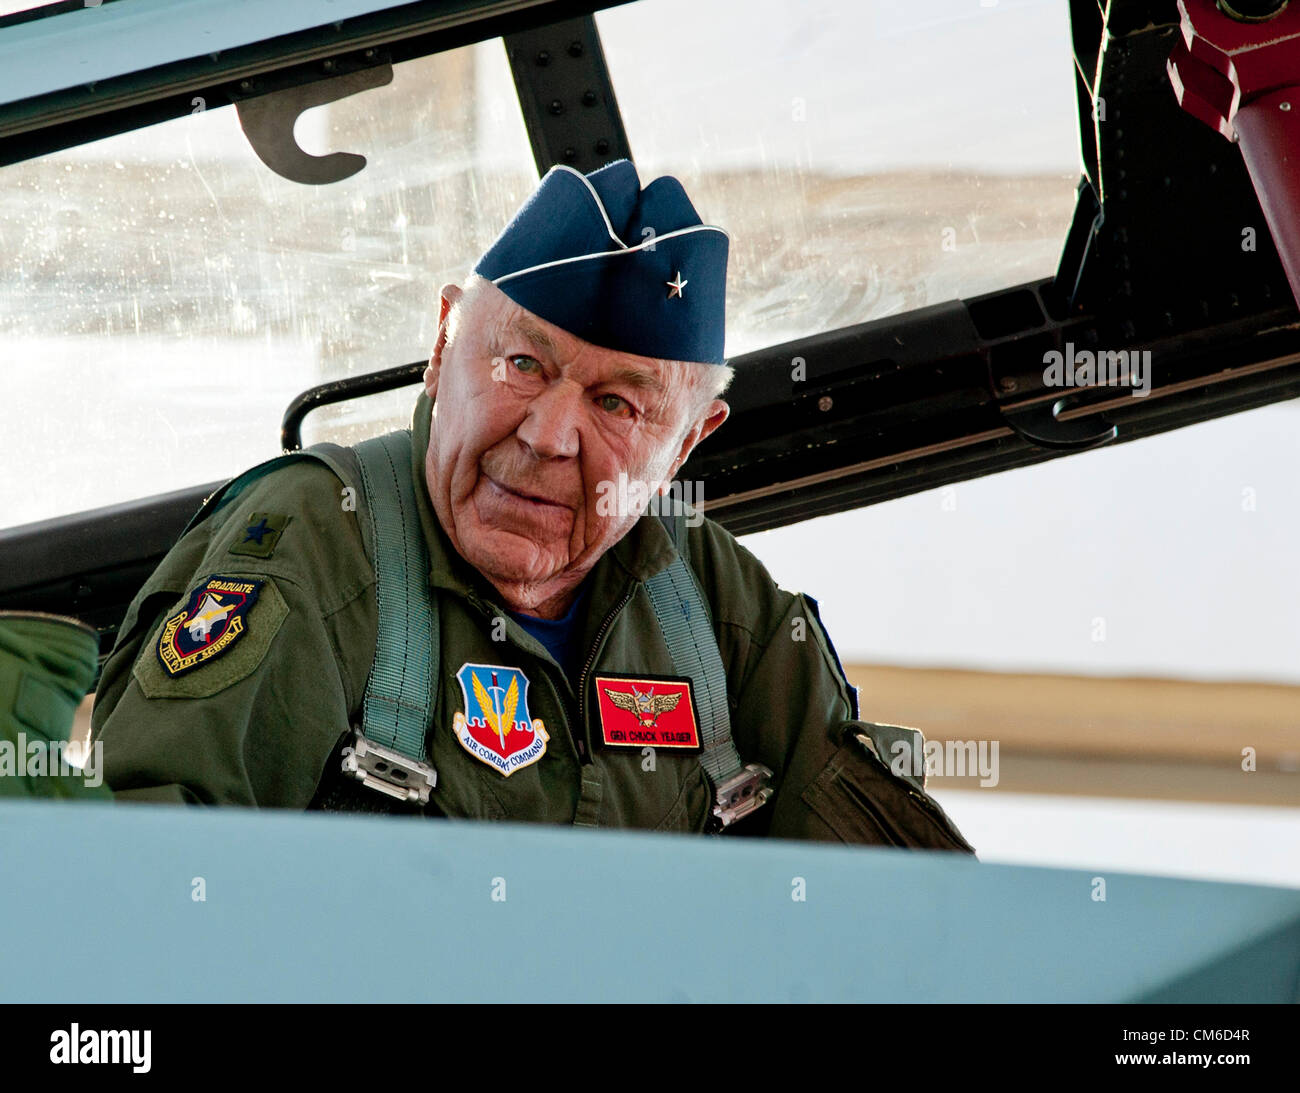 Retired United States Air Force Brig. Gen. Chuck Yeager, 89, in the cockpit on an F-15D Eagle fighter aircraft to celebrate the 65th anniversary of becoming the first person to break the sound barrier October 14, 2012, at Nellis Air Force Base, Nevada. In 1947 Yeager broke the sound barrier in a Bell XS-1 rocket research plane named Glamorous Glennis. Stock Photo